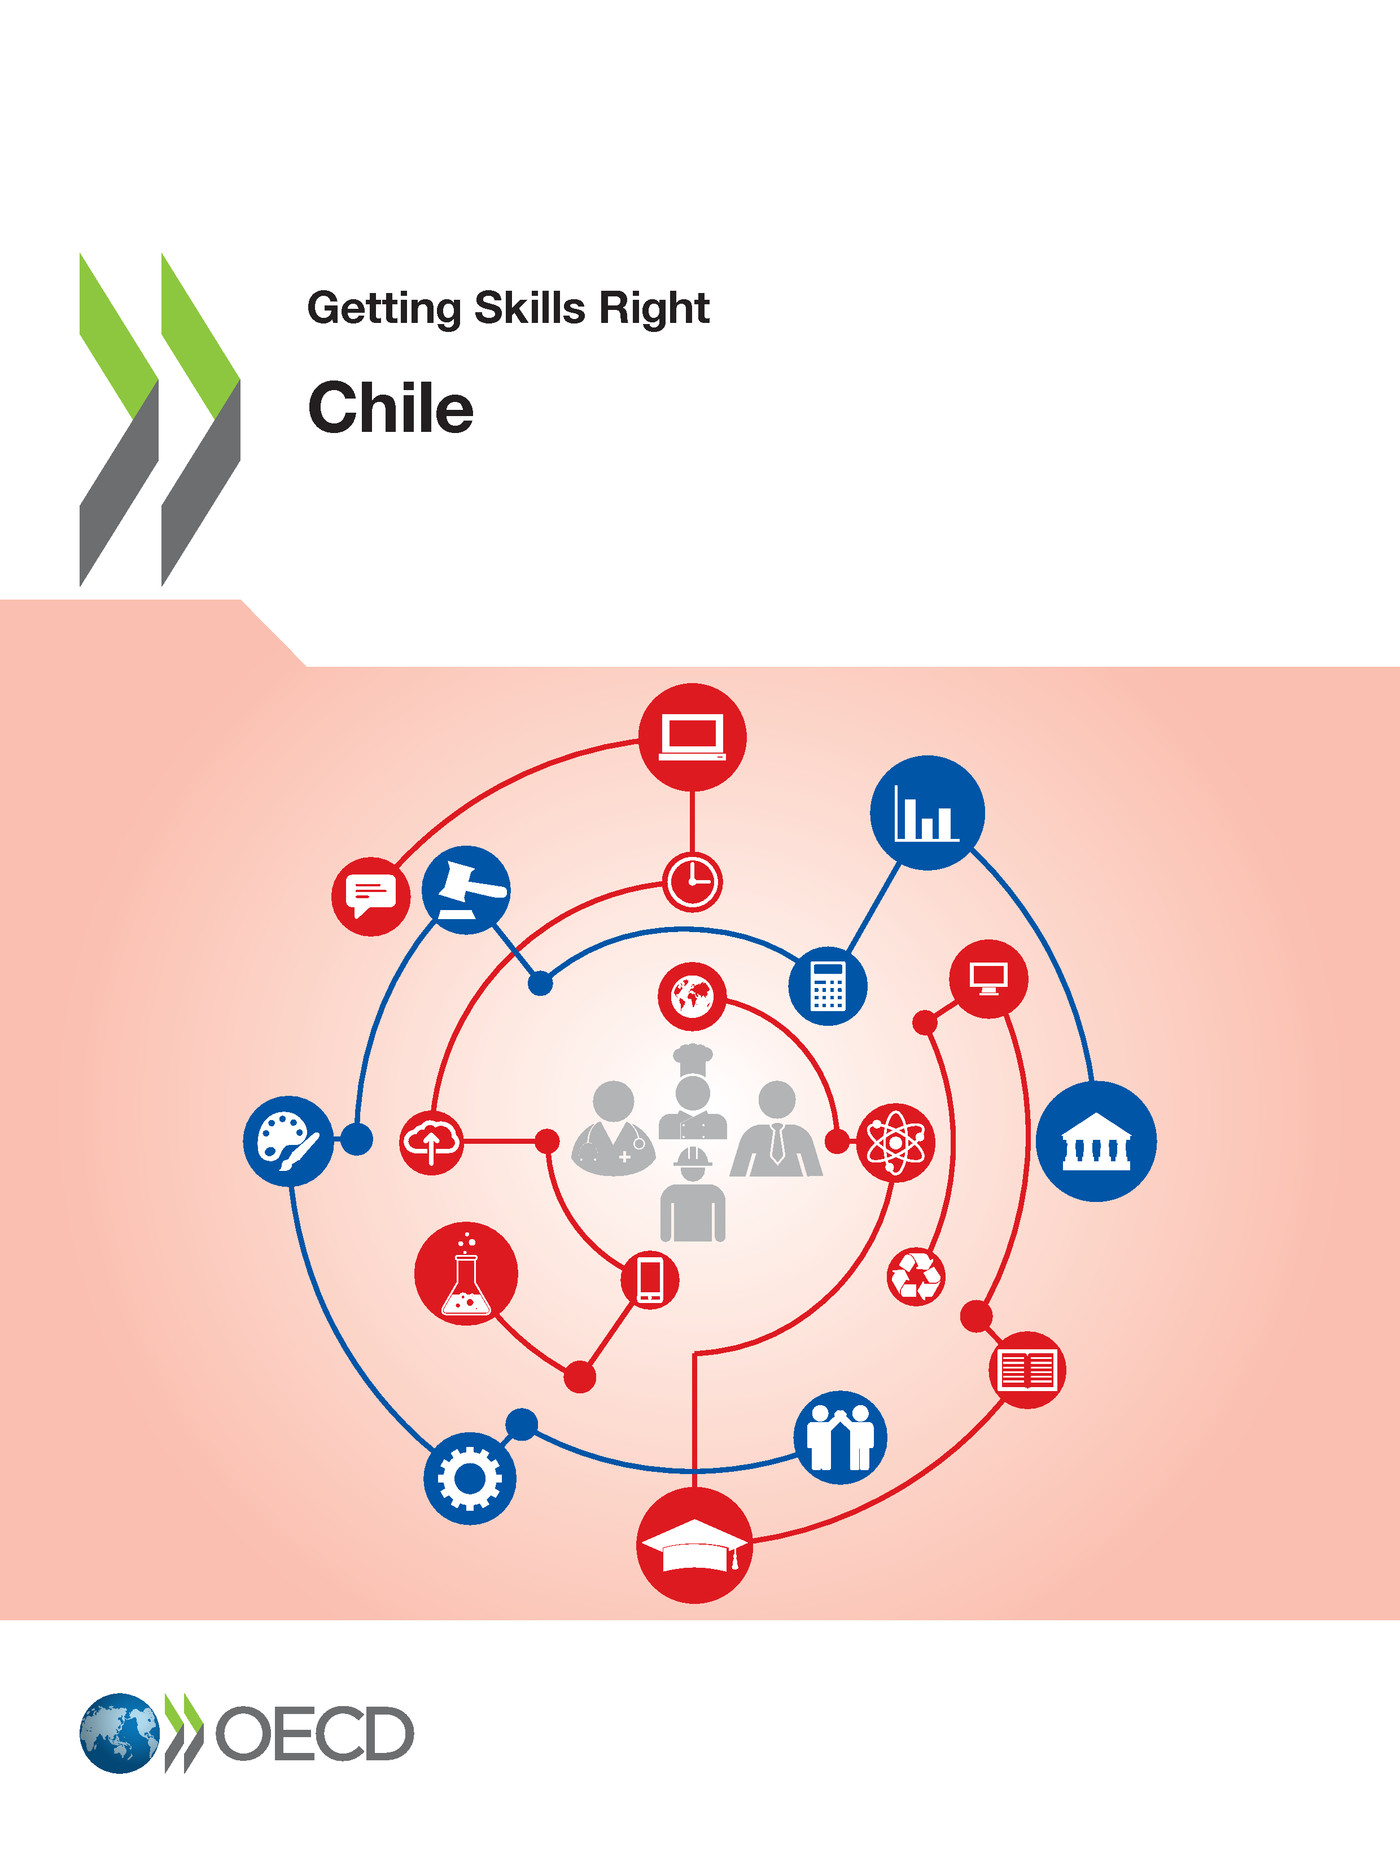 Getting Skills Right: Chile -  Collectif - OCDE / OECD